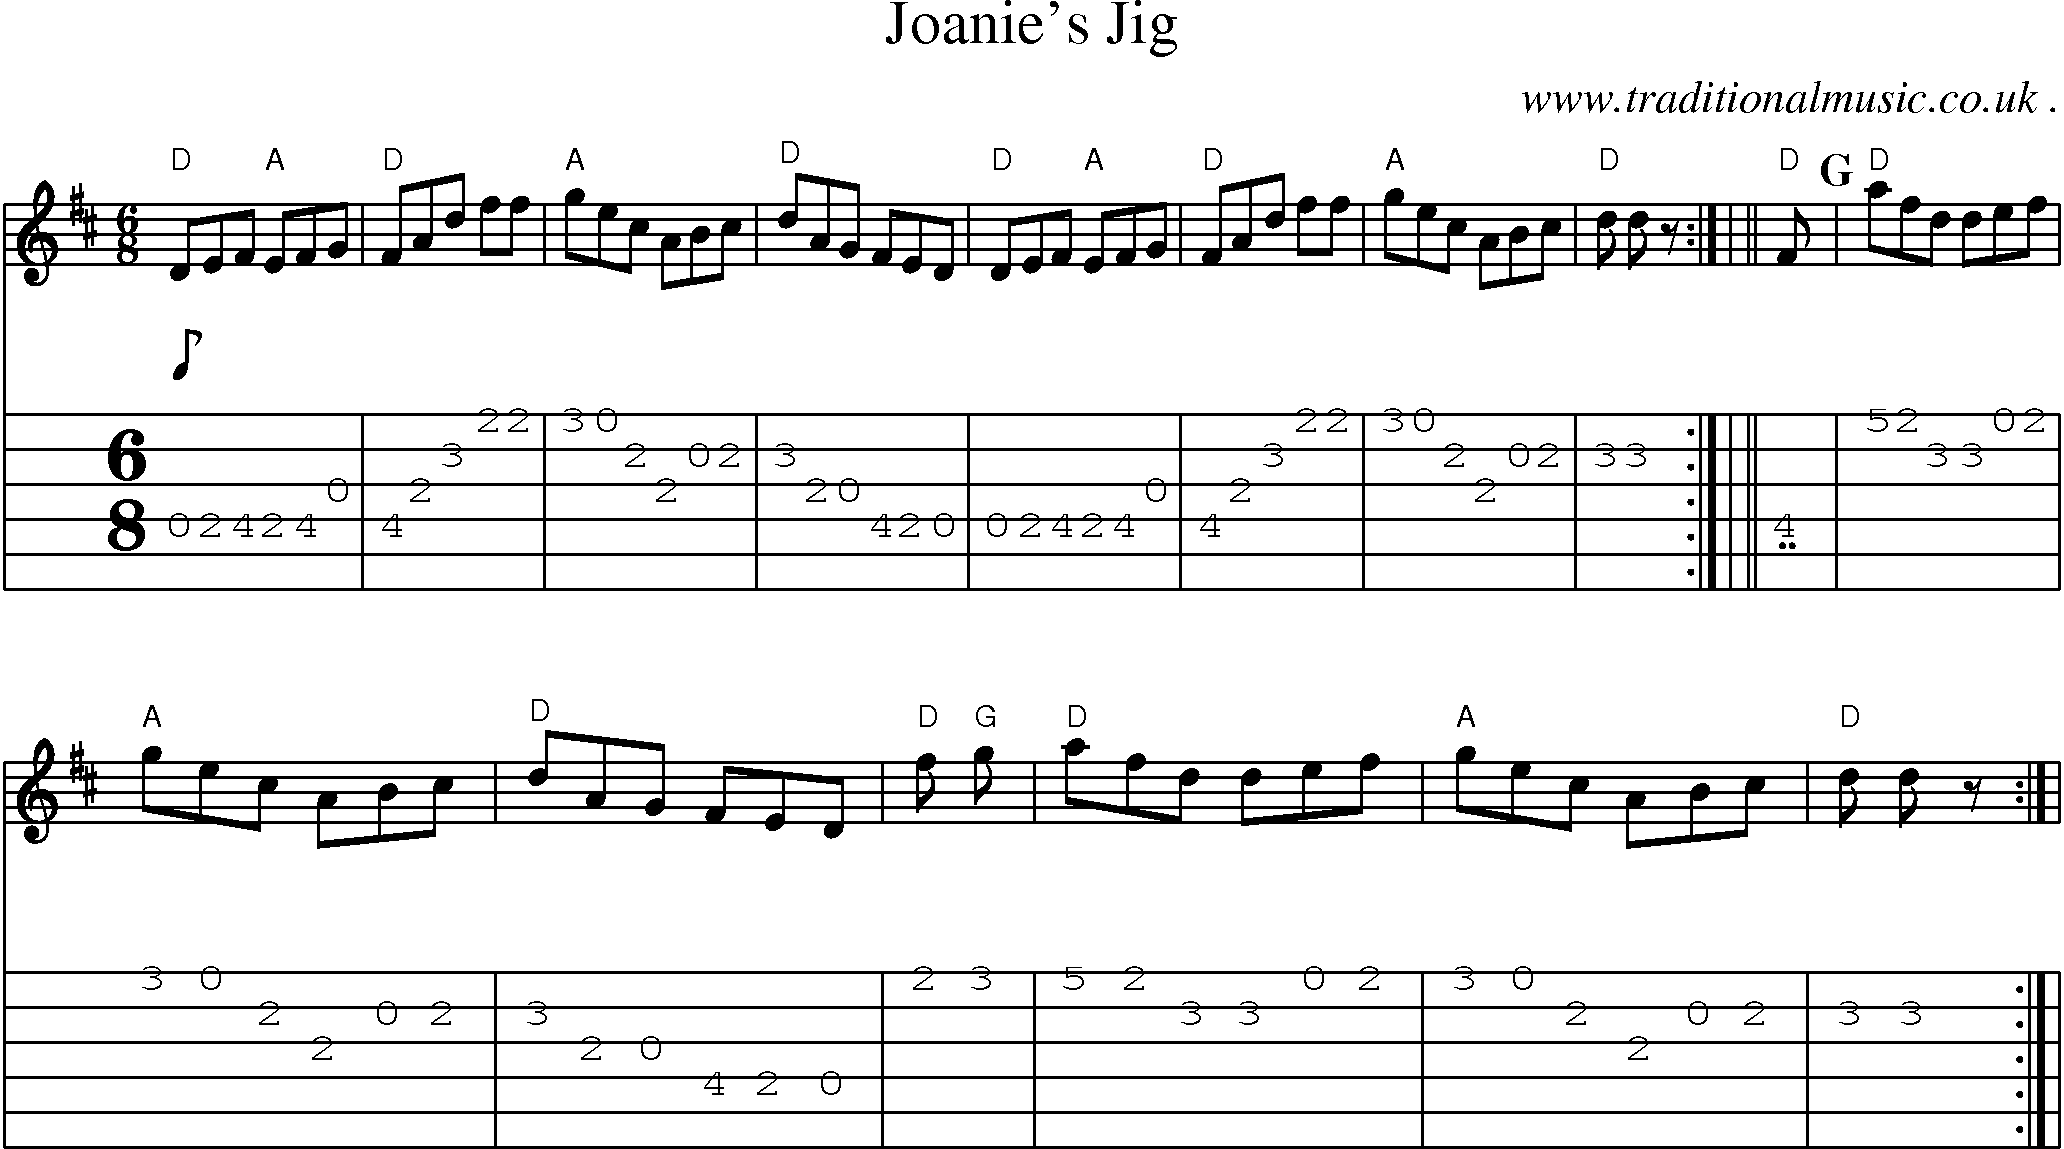 Sheet-music  score, Chords and Guitar Tabs for Joanies Jig